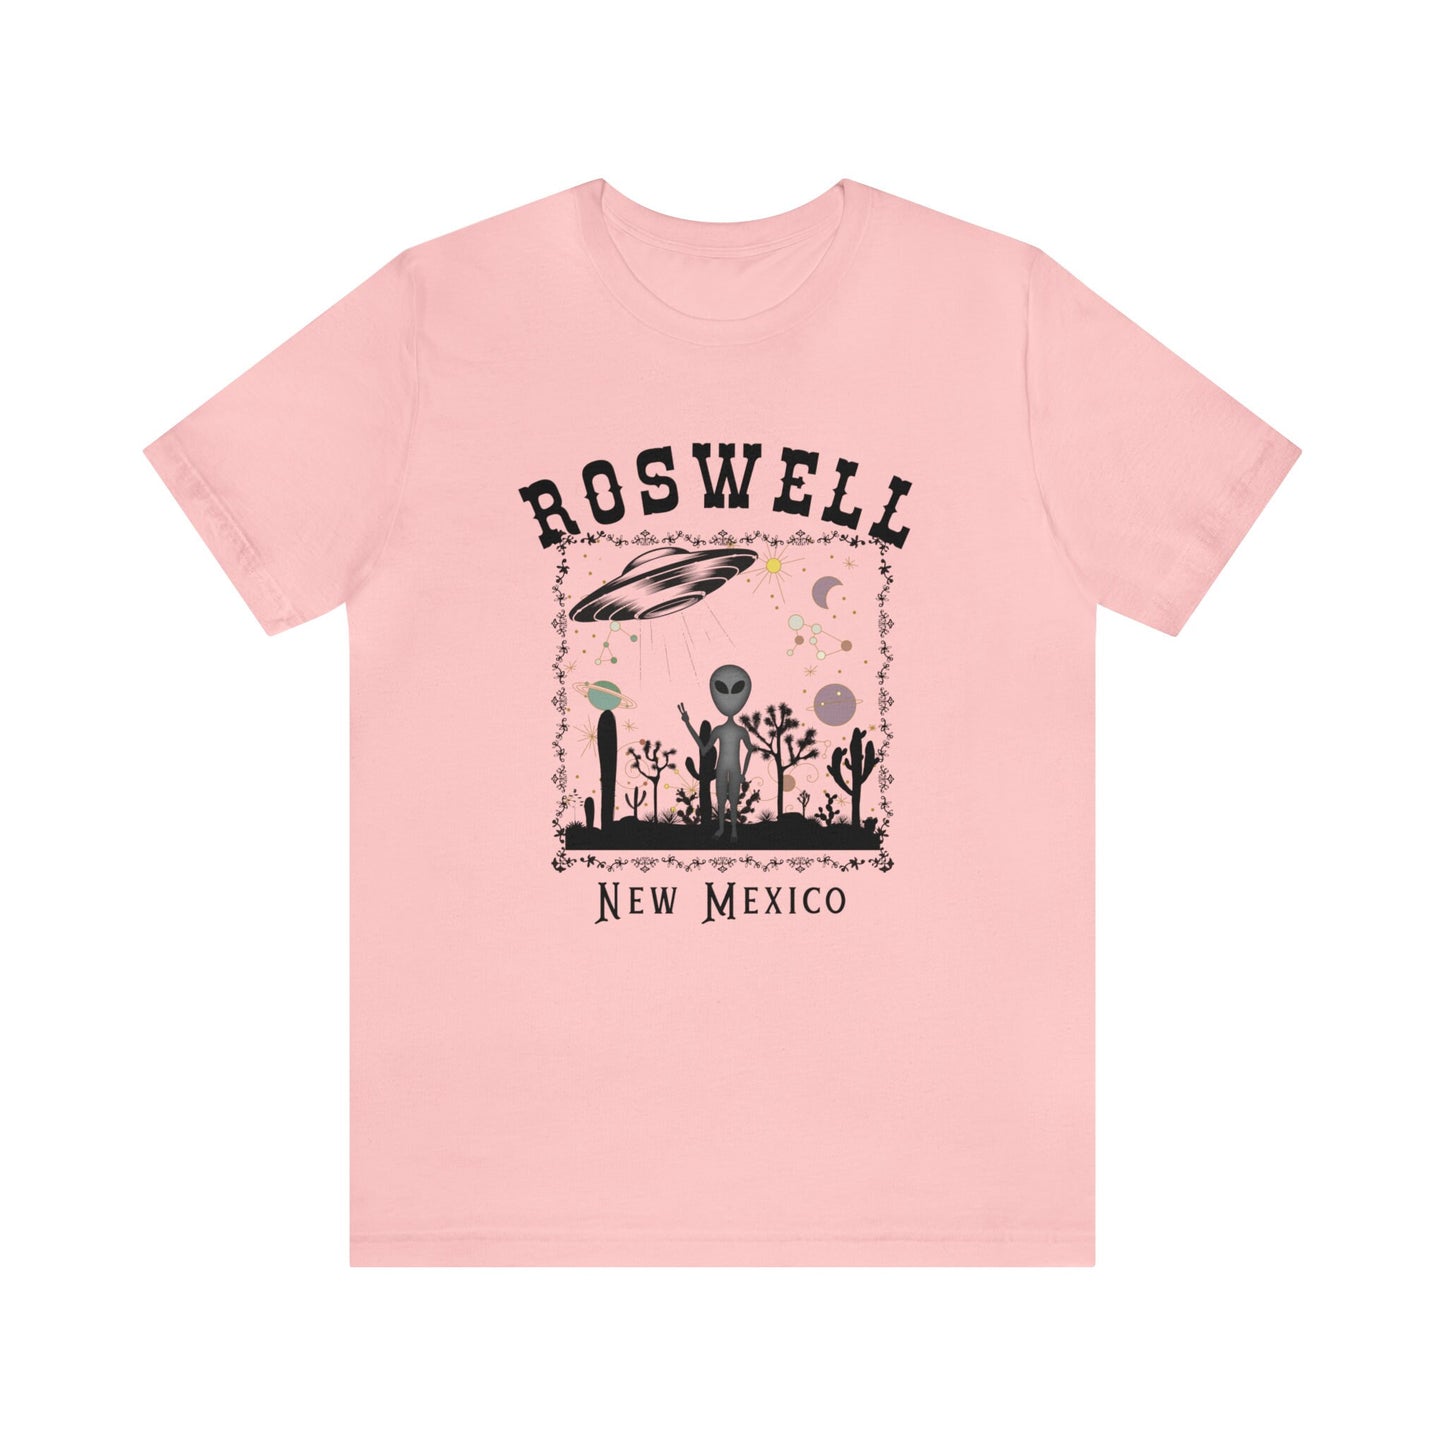 Alien Tshirt UFO Shirt Roswell New Mexico Cryptozoology Shirt Southwestern Shirt Western Graphic Tees Retro New Mexico Tee Cosmic Cowgirl